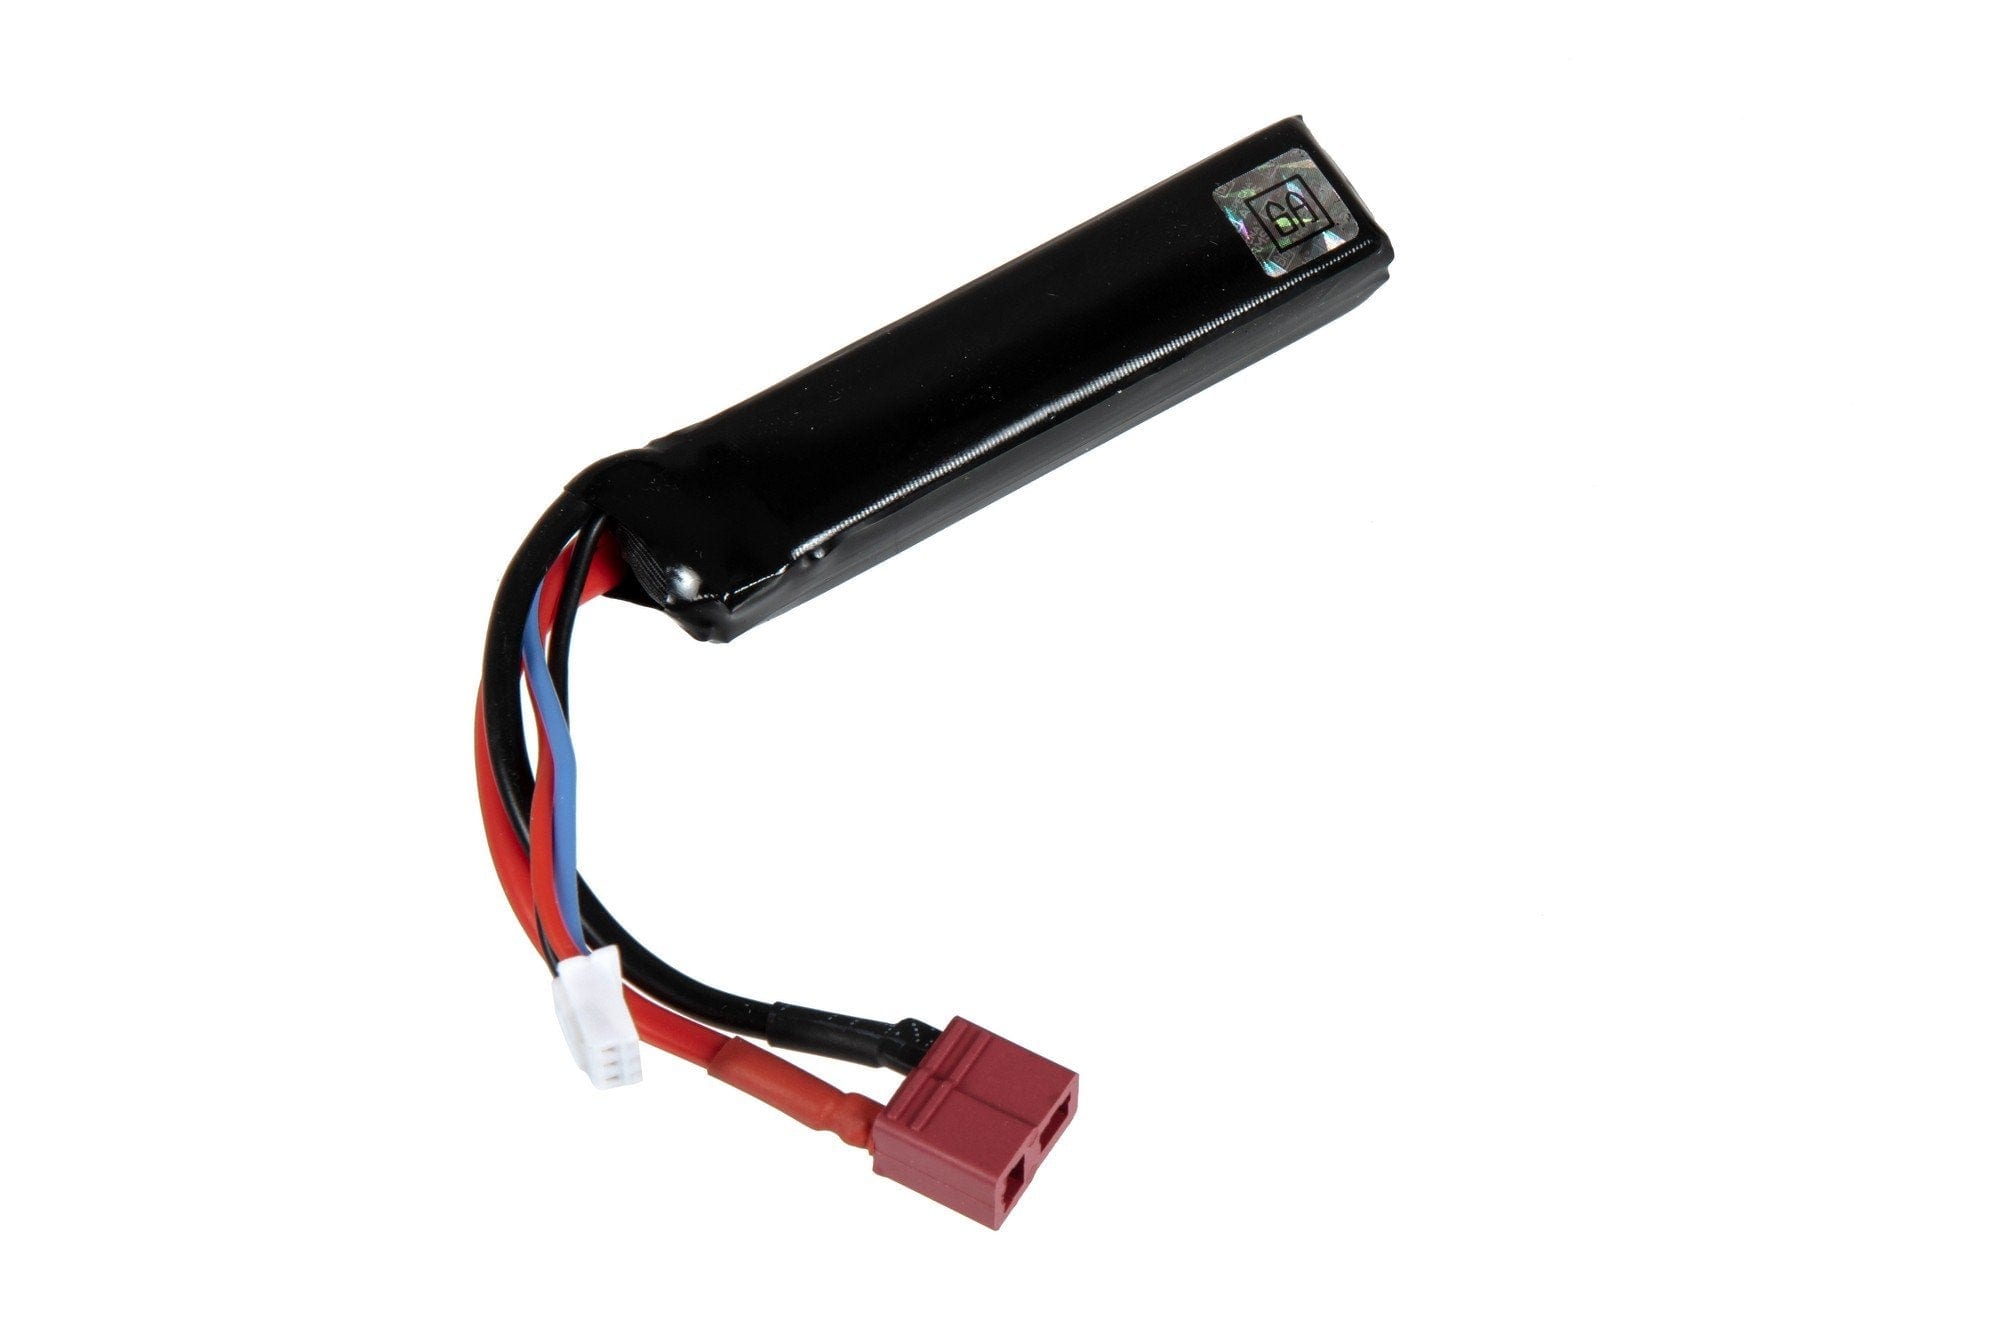 LiPo 7.4V 600mAh 20 / 40C Battery for PDW - T-Connect (Deans) by Specna Arms on Airsoft Mania Europe